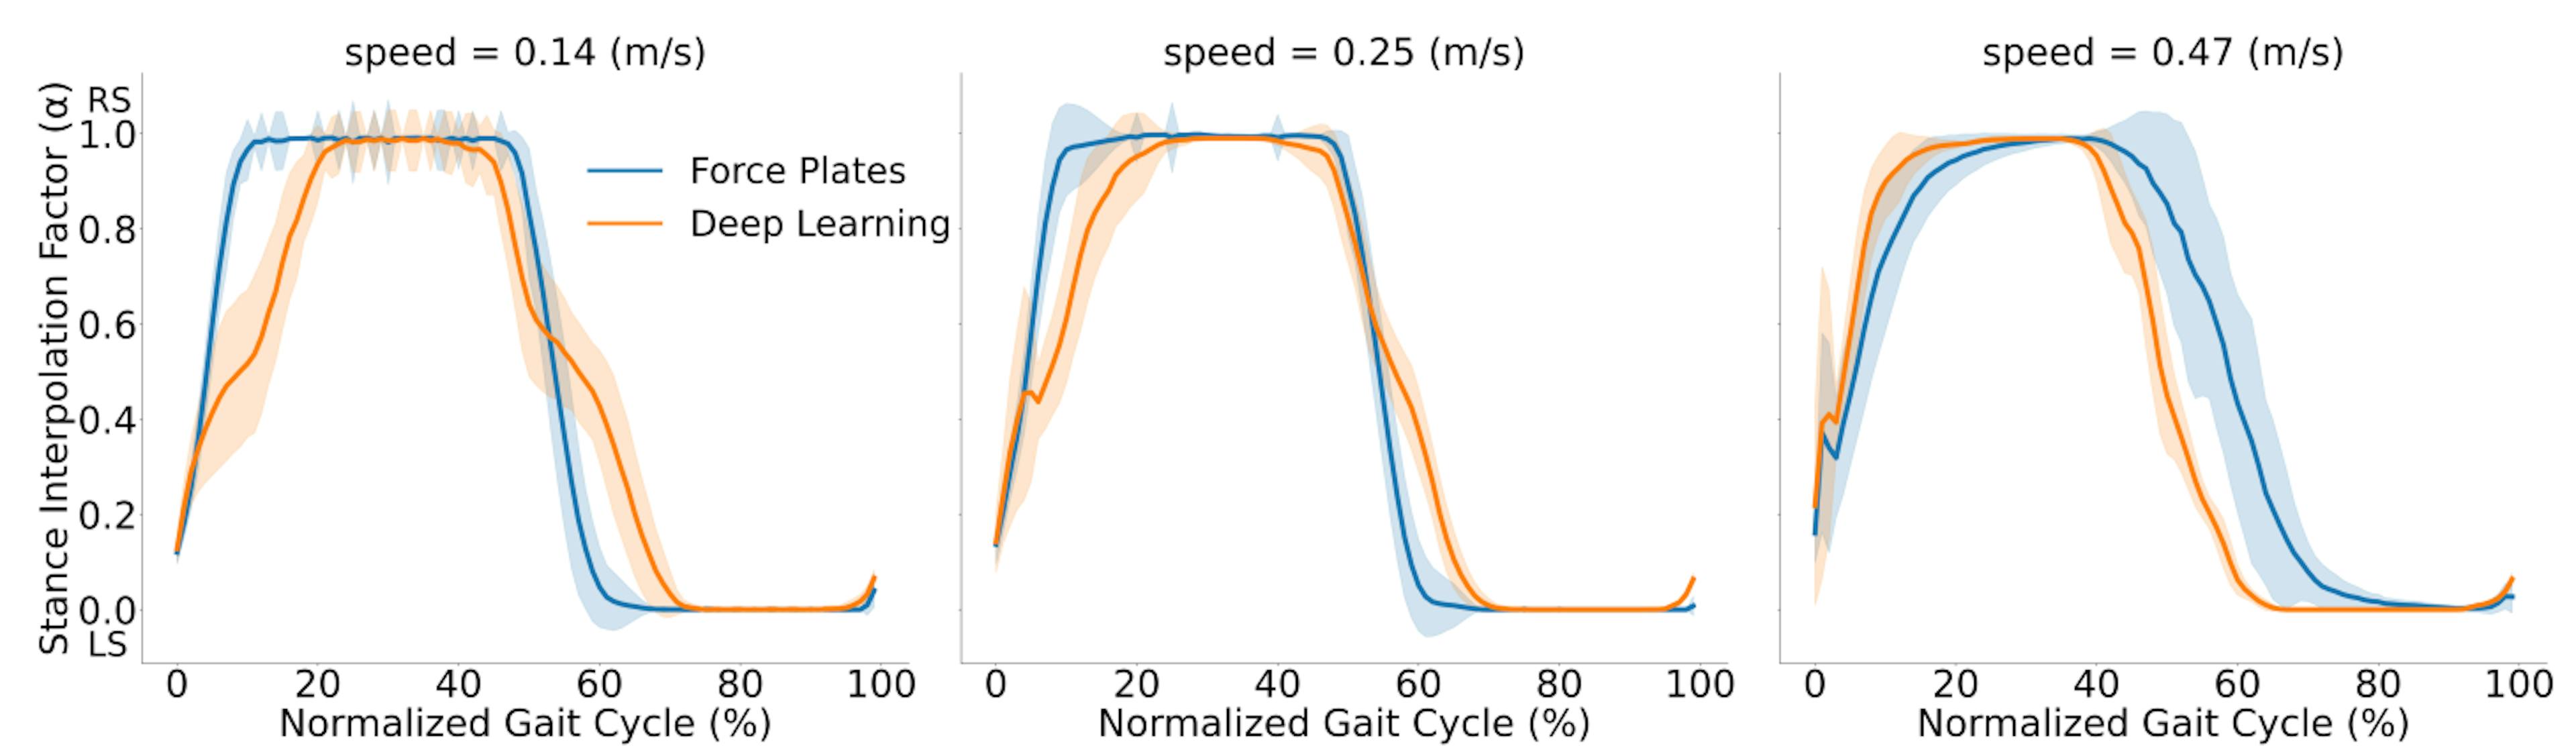 Fig. 4: Stance interpolation factor using the treadmill force plates (blue) and using the deep-learning prediction (orange) for closed-loop exoskeleton control. Shaded error bars indicate ± one standard deviation relative to the mean. RS and LS denote Right Stance (α = 1) and Left Stance (α = 0), respectively. User walked at 0.14 m/s, 0.25 m/s and 0.47 m/s for one minute in every condition.